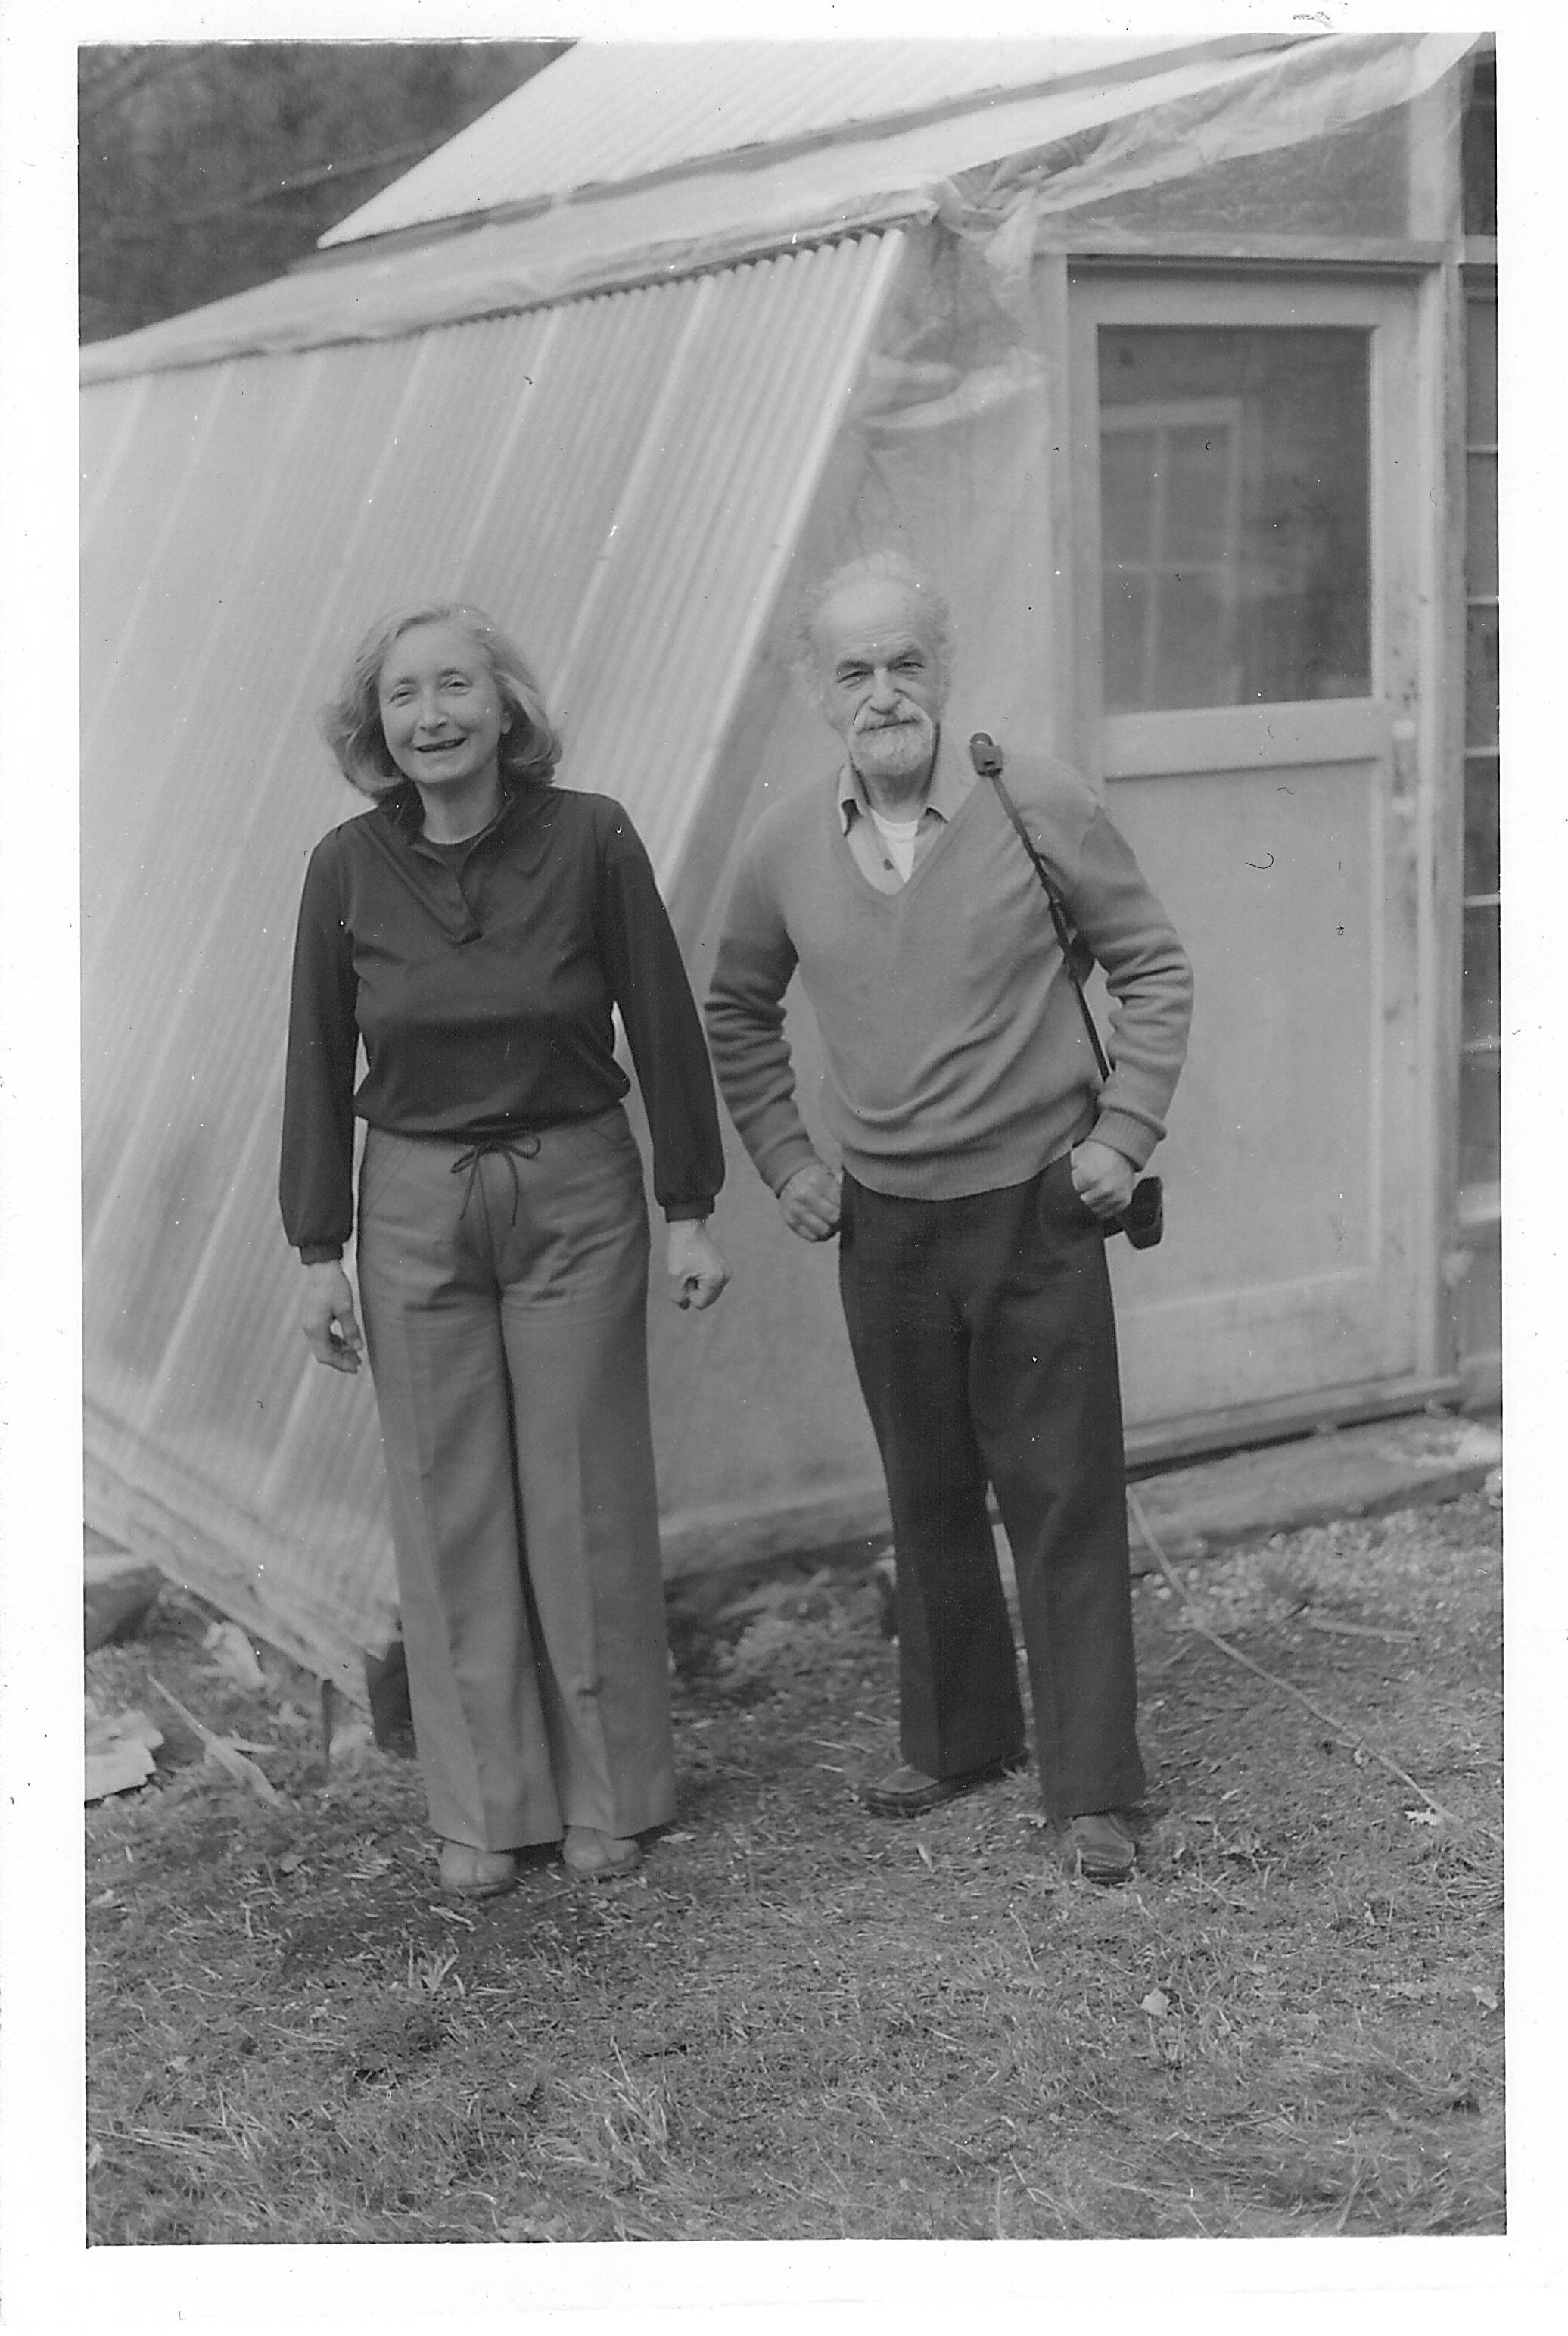 We know nothing about who this couple may be - we aren't even sure if they are from Fort Vermilion! Let us know if you know them!
2017.37.97 / Goldsmith, Claire